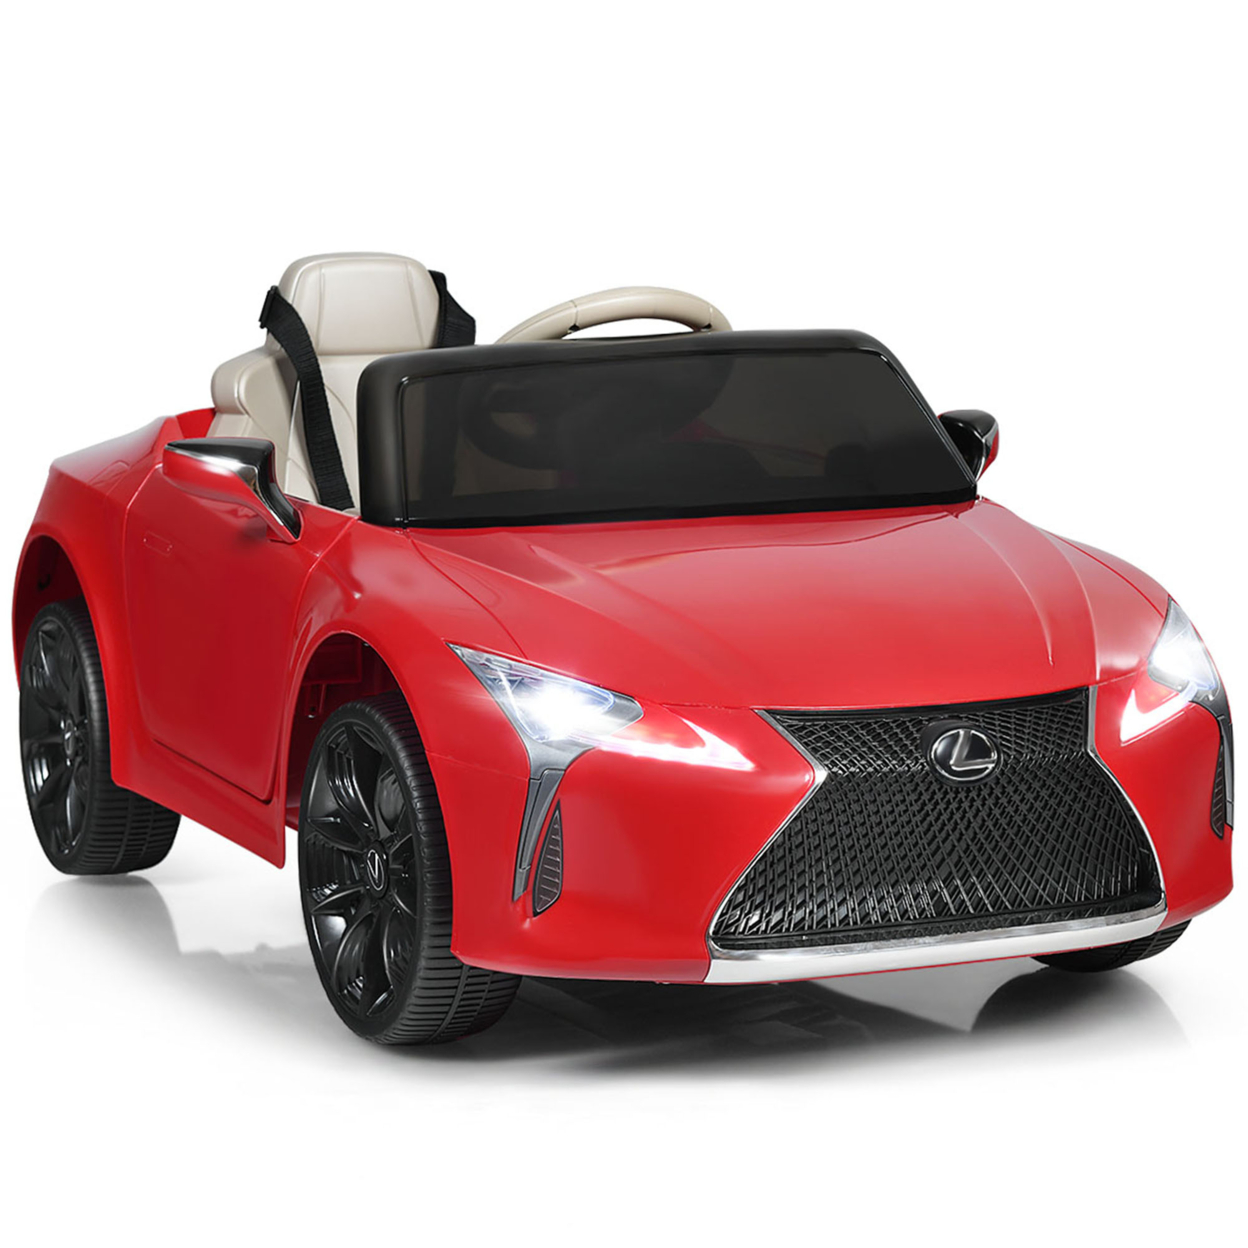 12V Licensed Lexus LC500 Kids Ride On Car W/ MP3 Remote Control Black/Red/White - Red